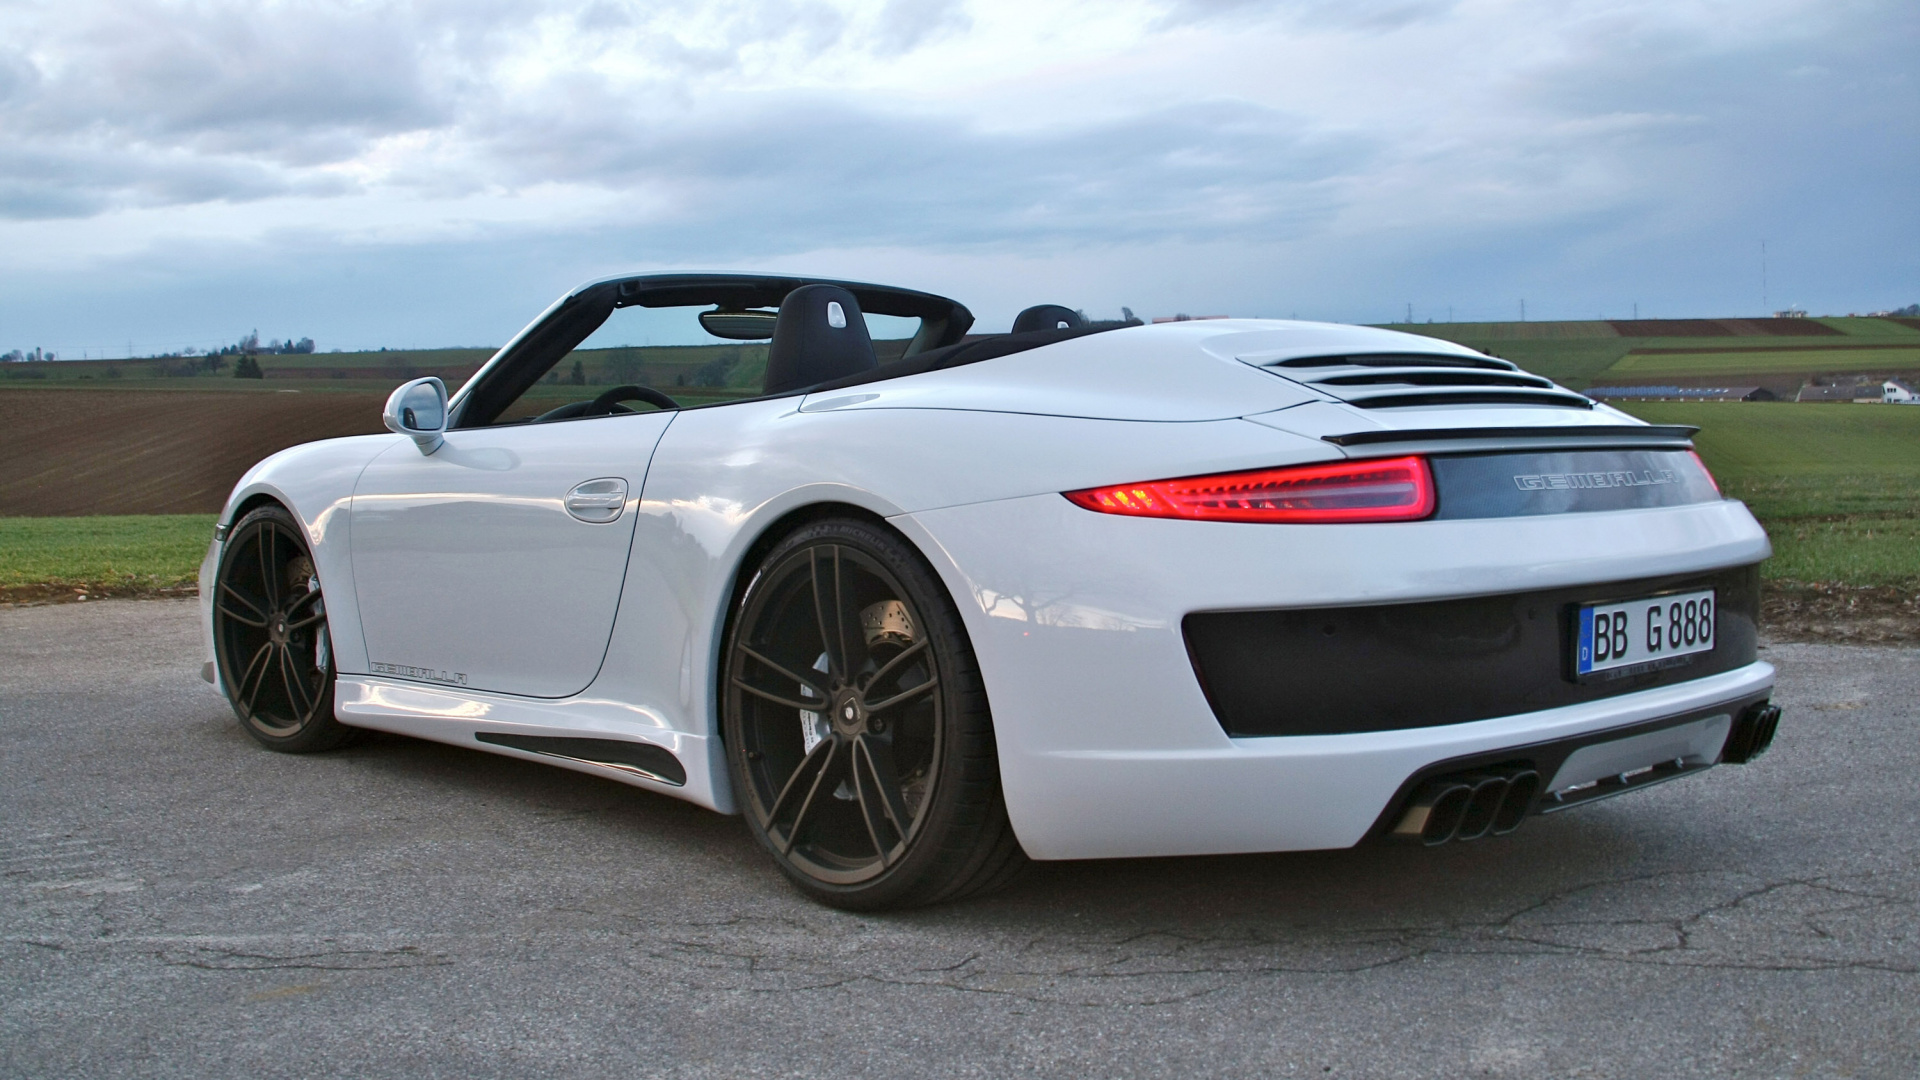 White Porsche 911 on Road Under Cloudy Sky During Daytime. Wallpaper in 1920x1080 Resolution